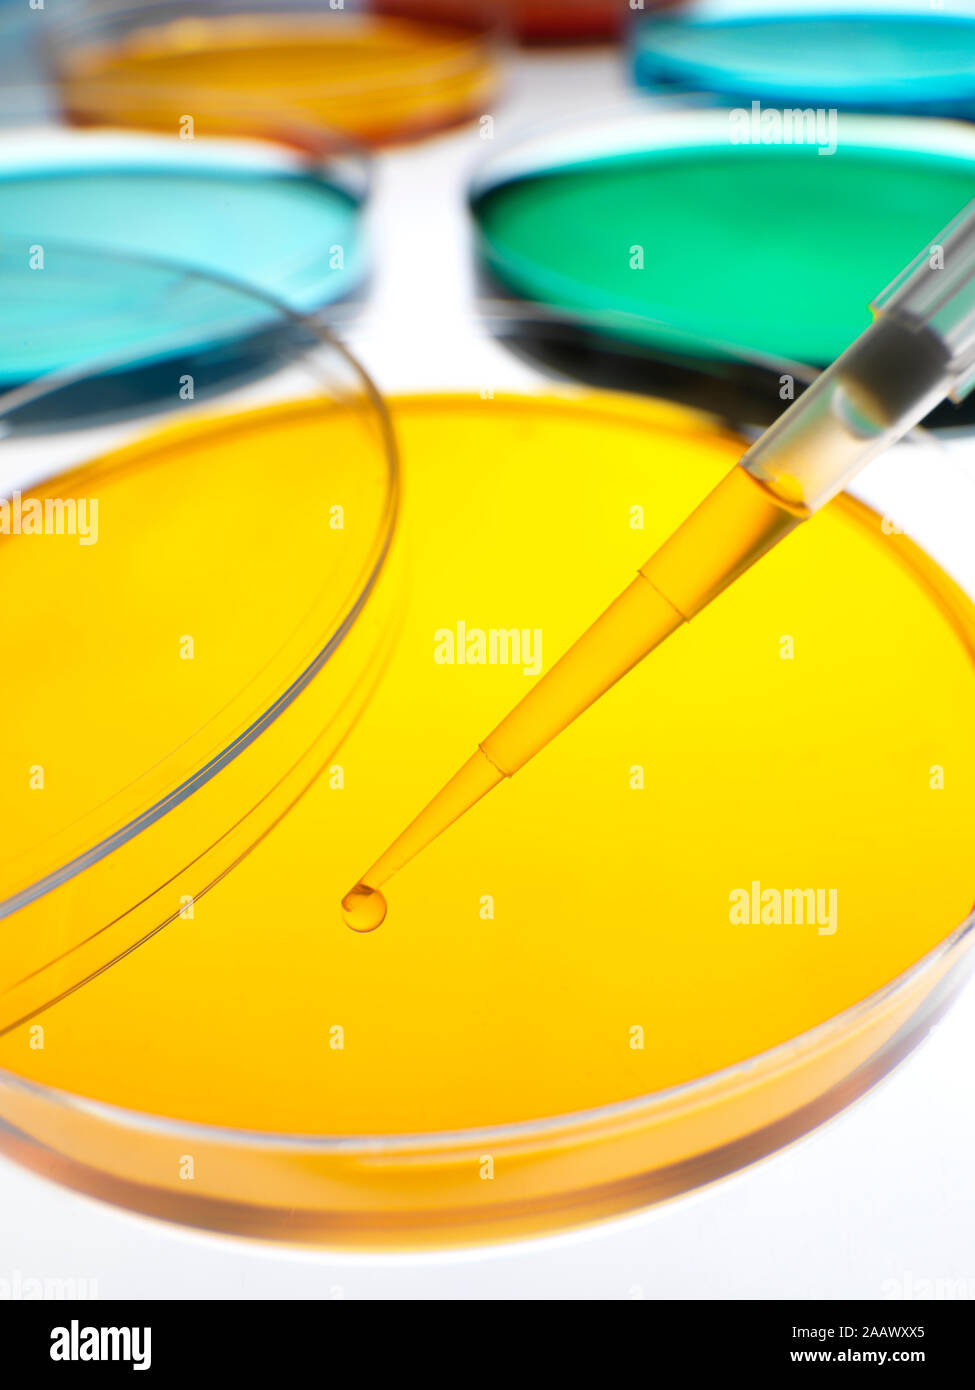 Close-up of samples pipetting in petri dishes containing colorful agar jellies at laboratory Stock Photo